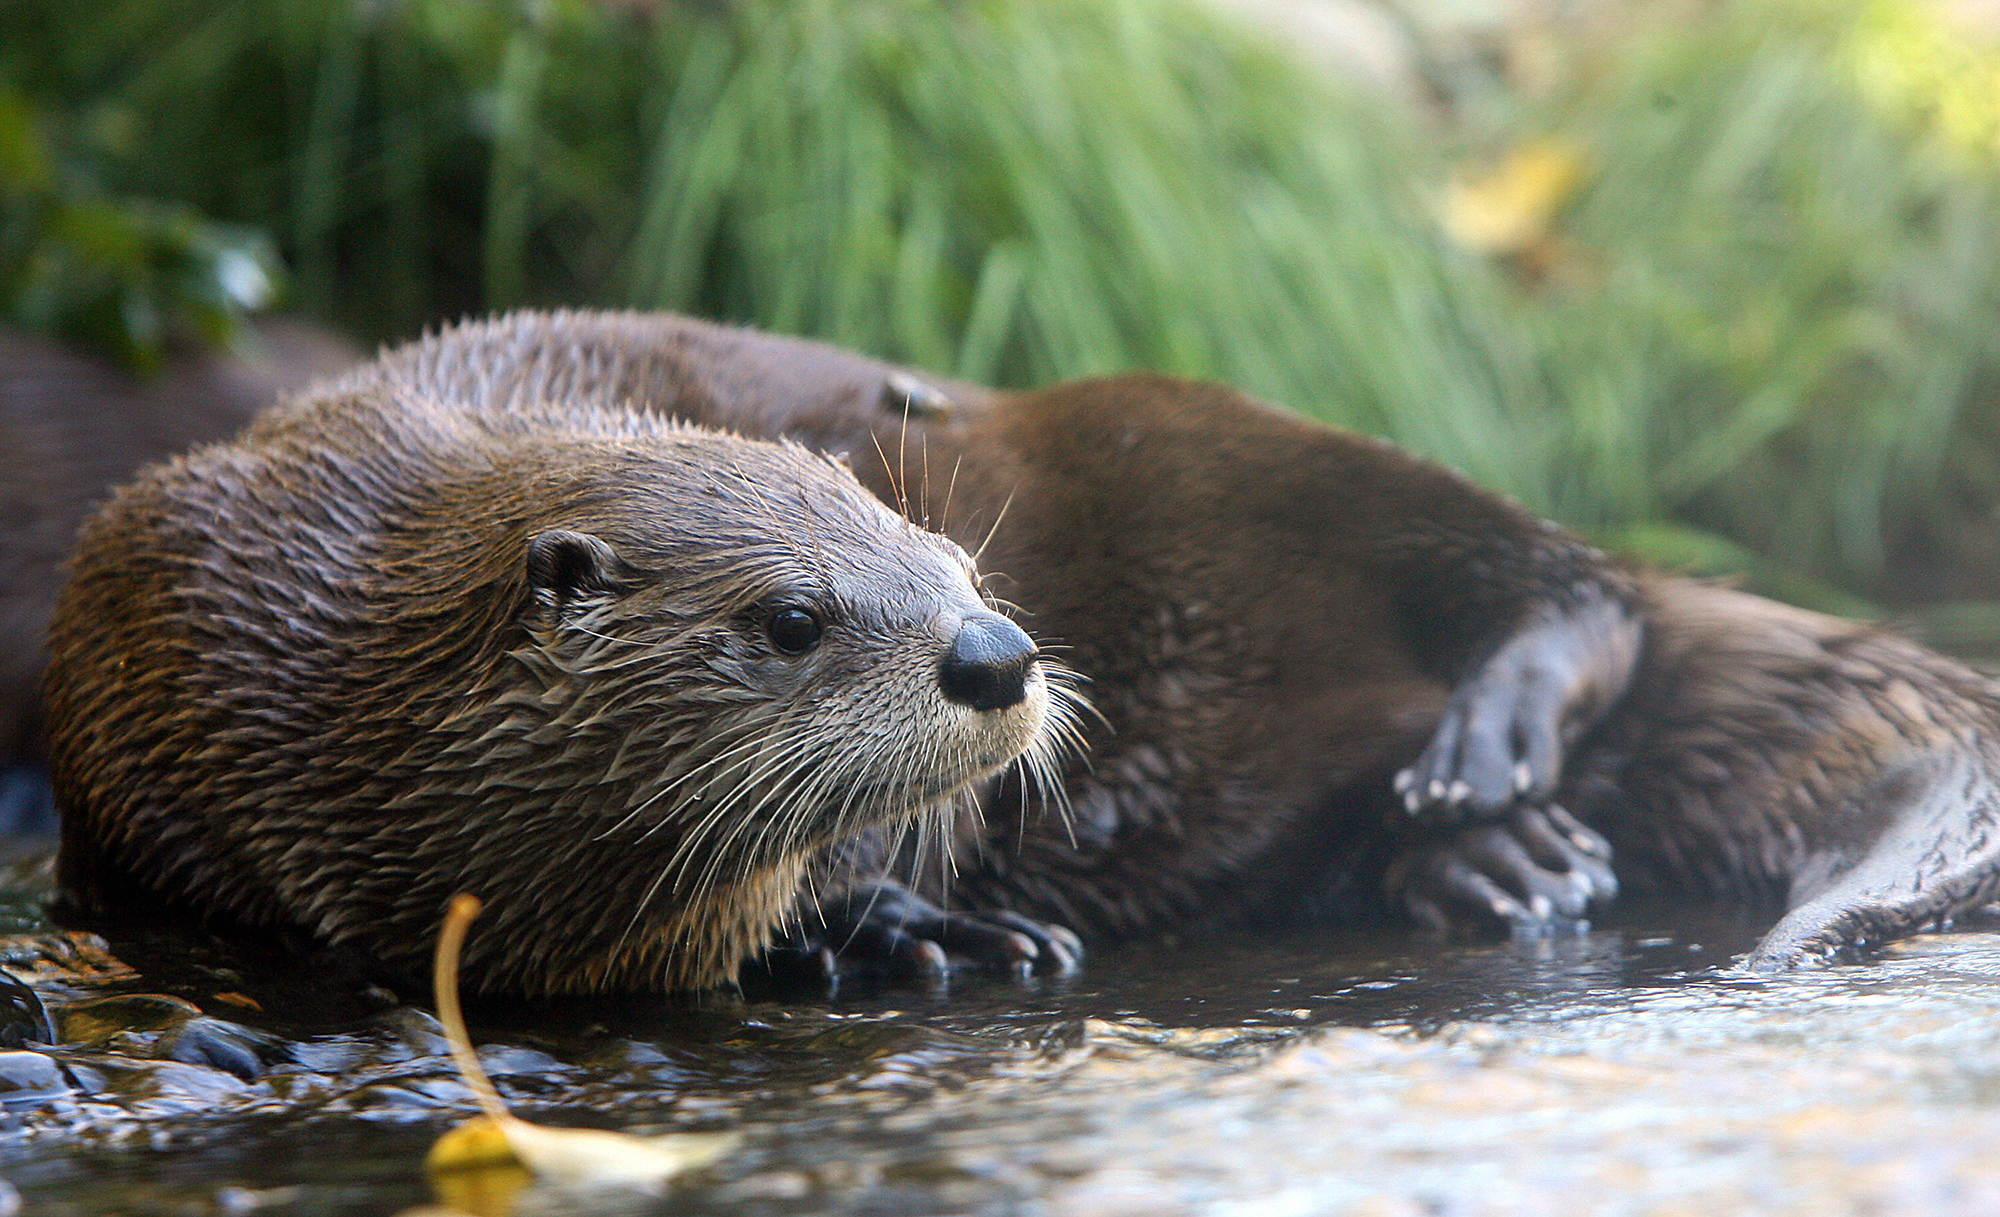 A River Otter rest in its exhibit at the